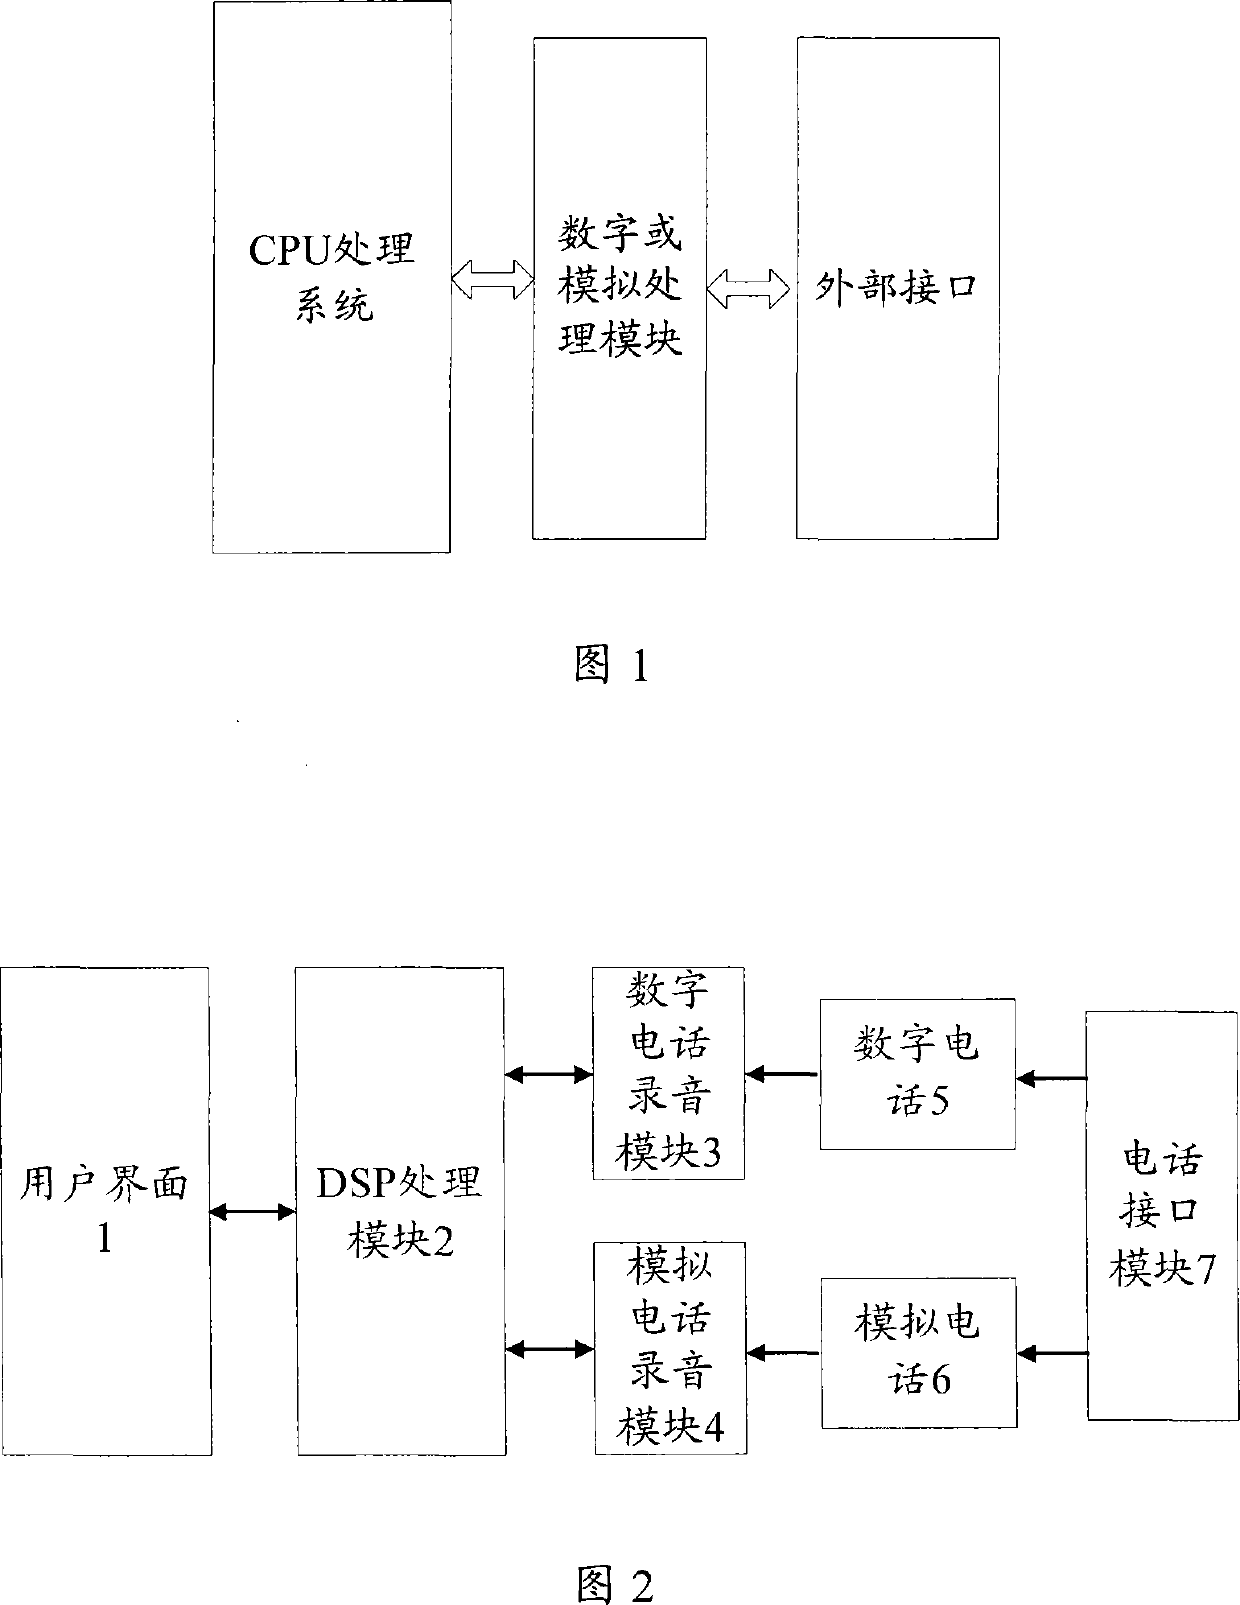 Telephone sound-recording system and implementing method thereof